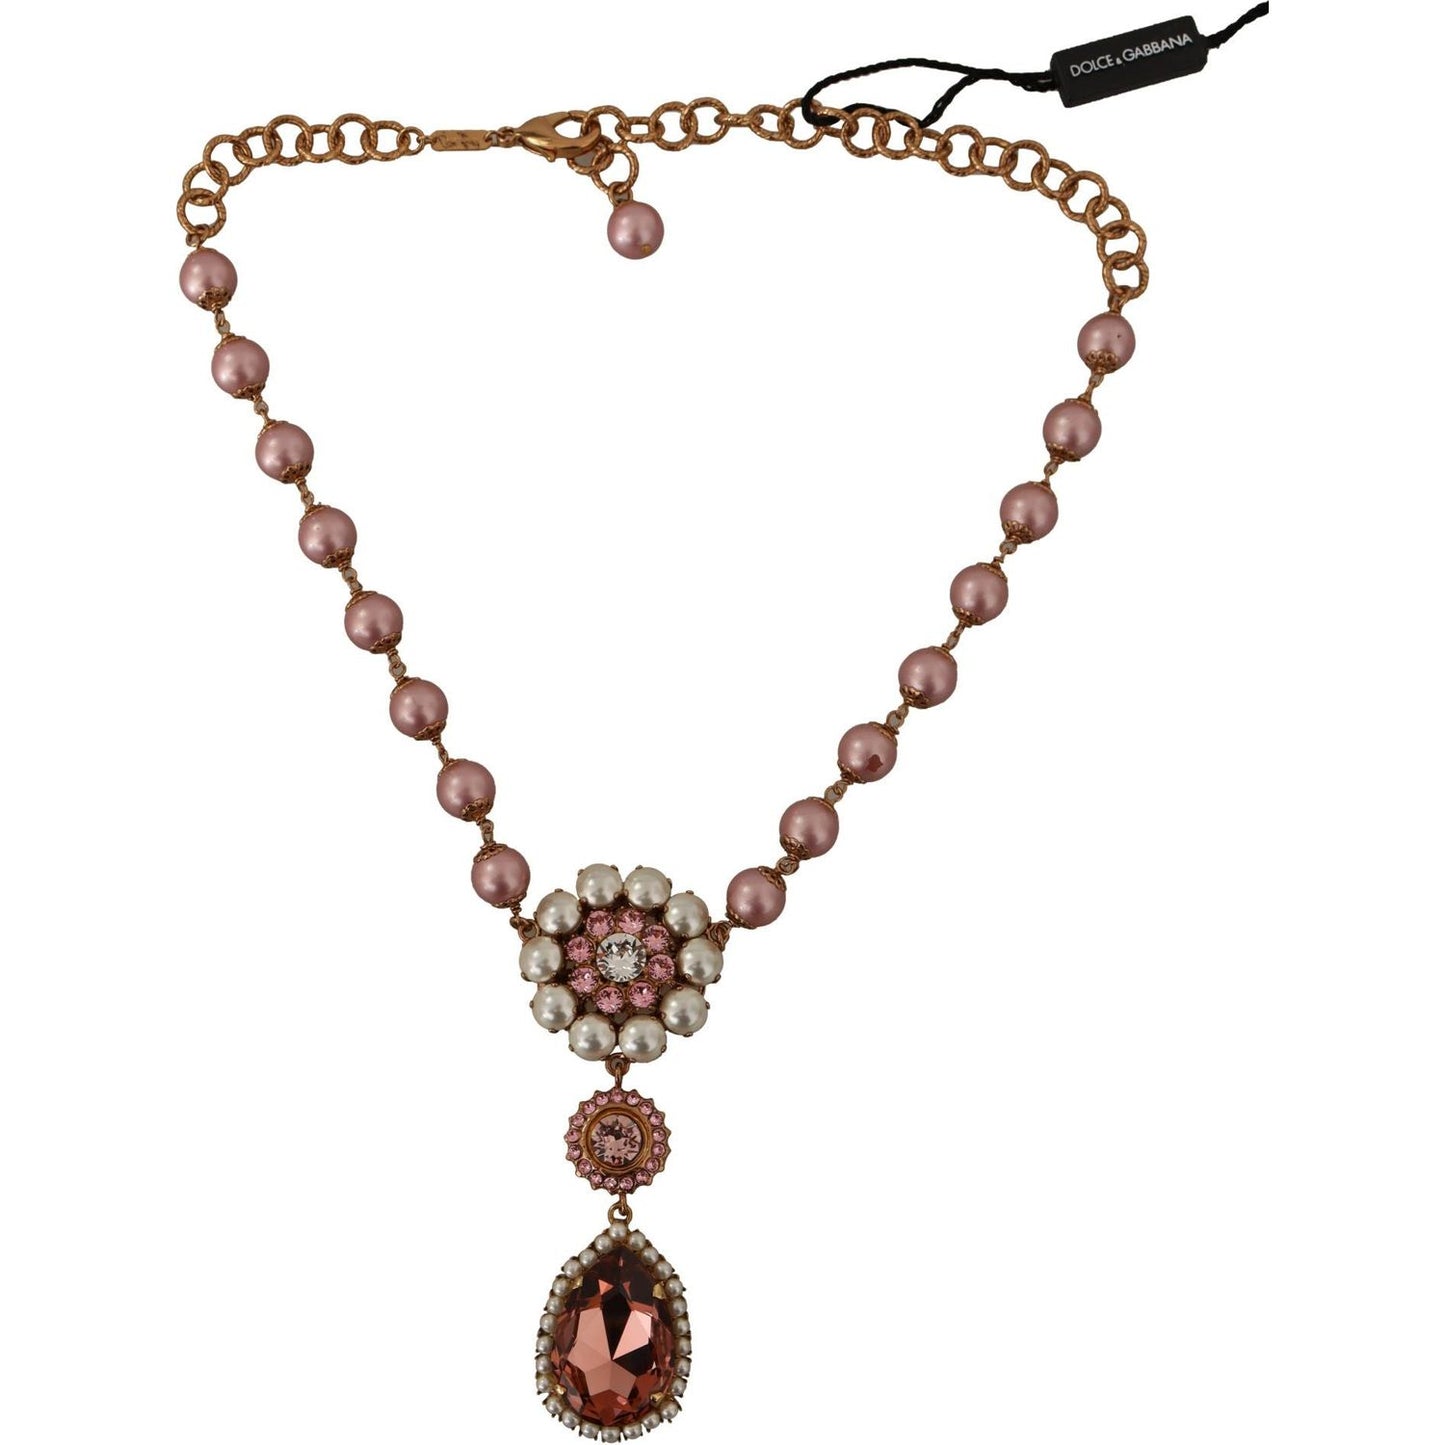 Dolce & Gabbana Elegant Gold Tone Faux Pearl Charm Necklace gold-tone-brass-pink-beaded-pearls-crystal-pendant-necklace WOMAN NECKLACE IMG_8760-scaled-e5937d99-b84.jpg